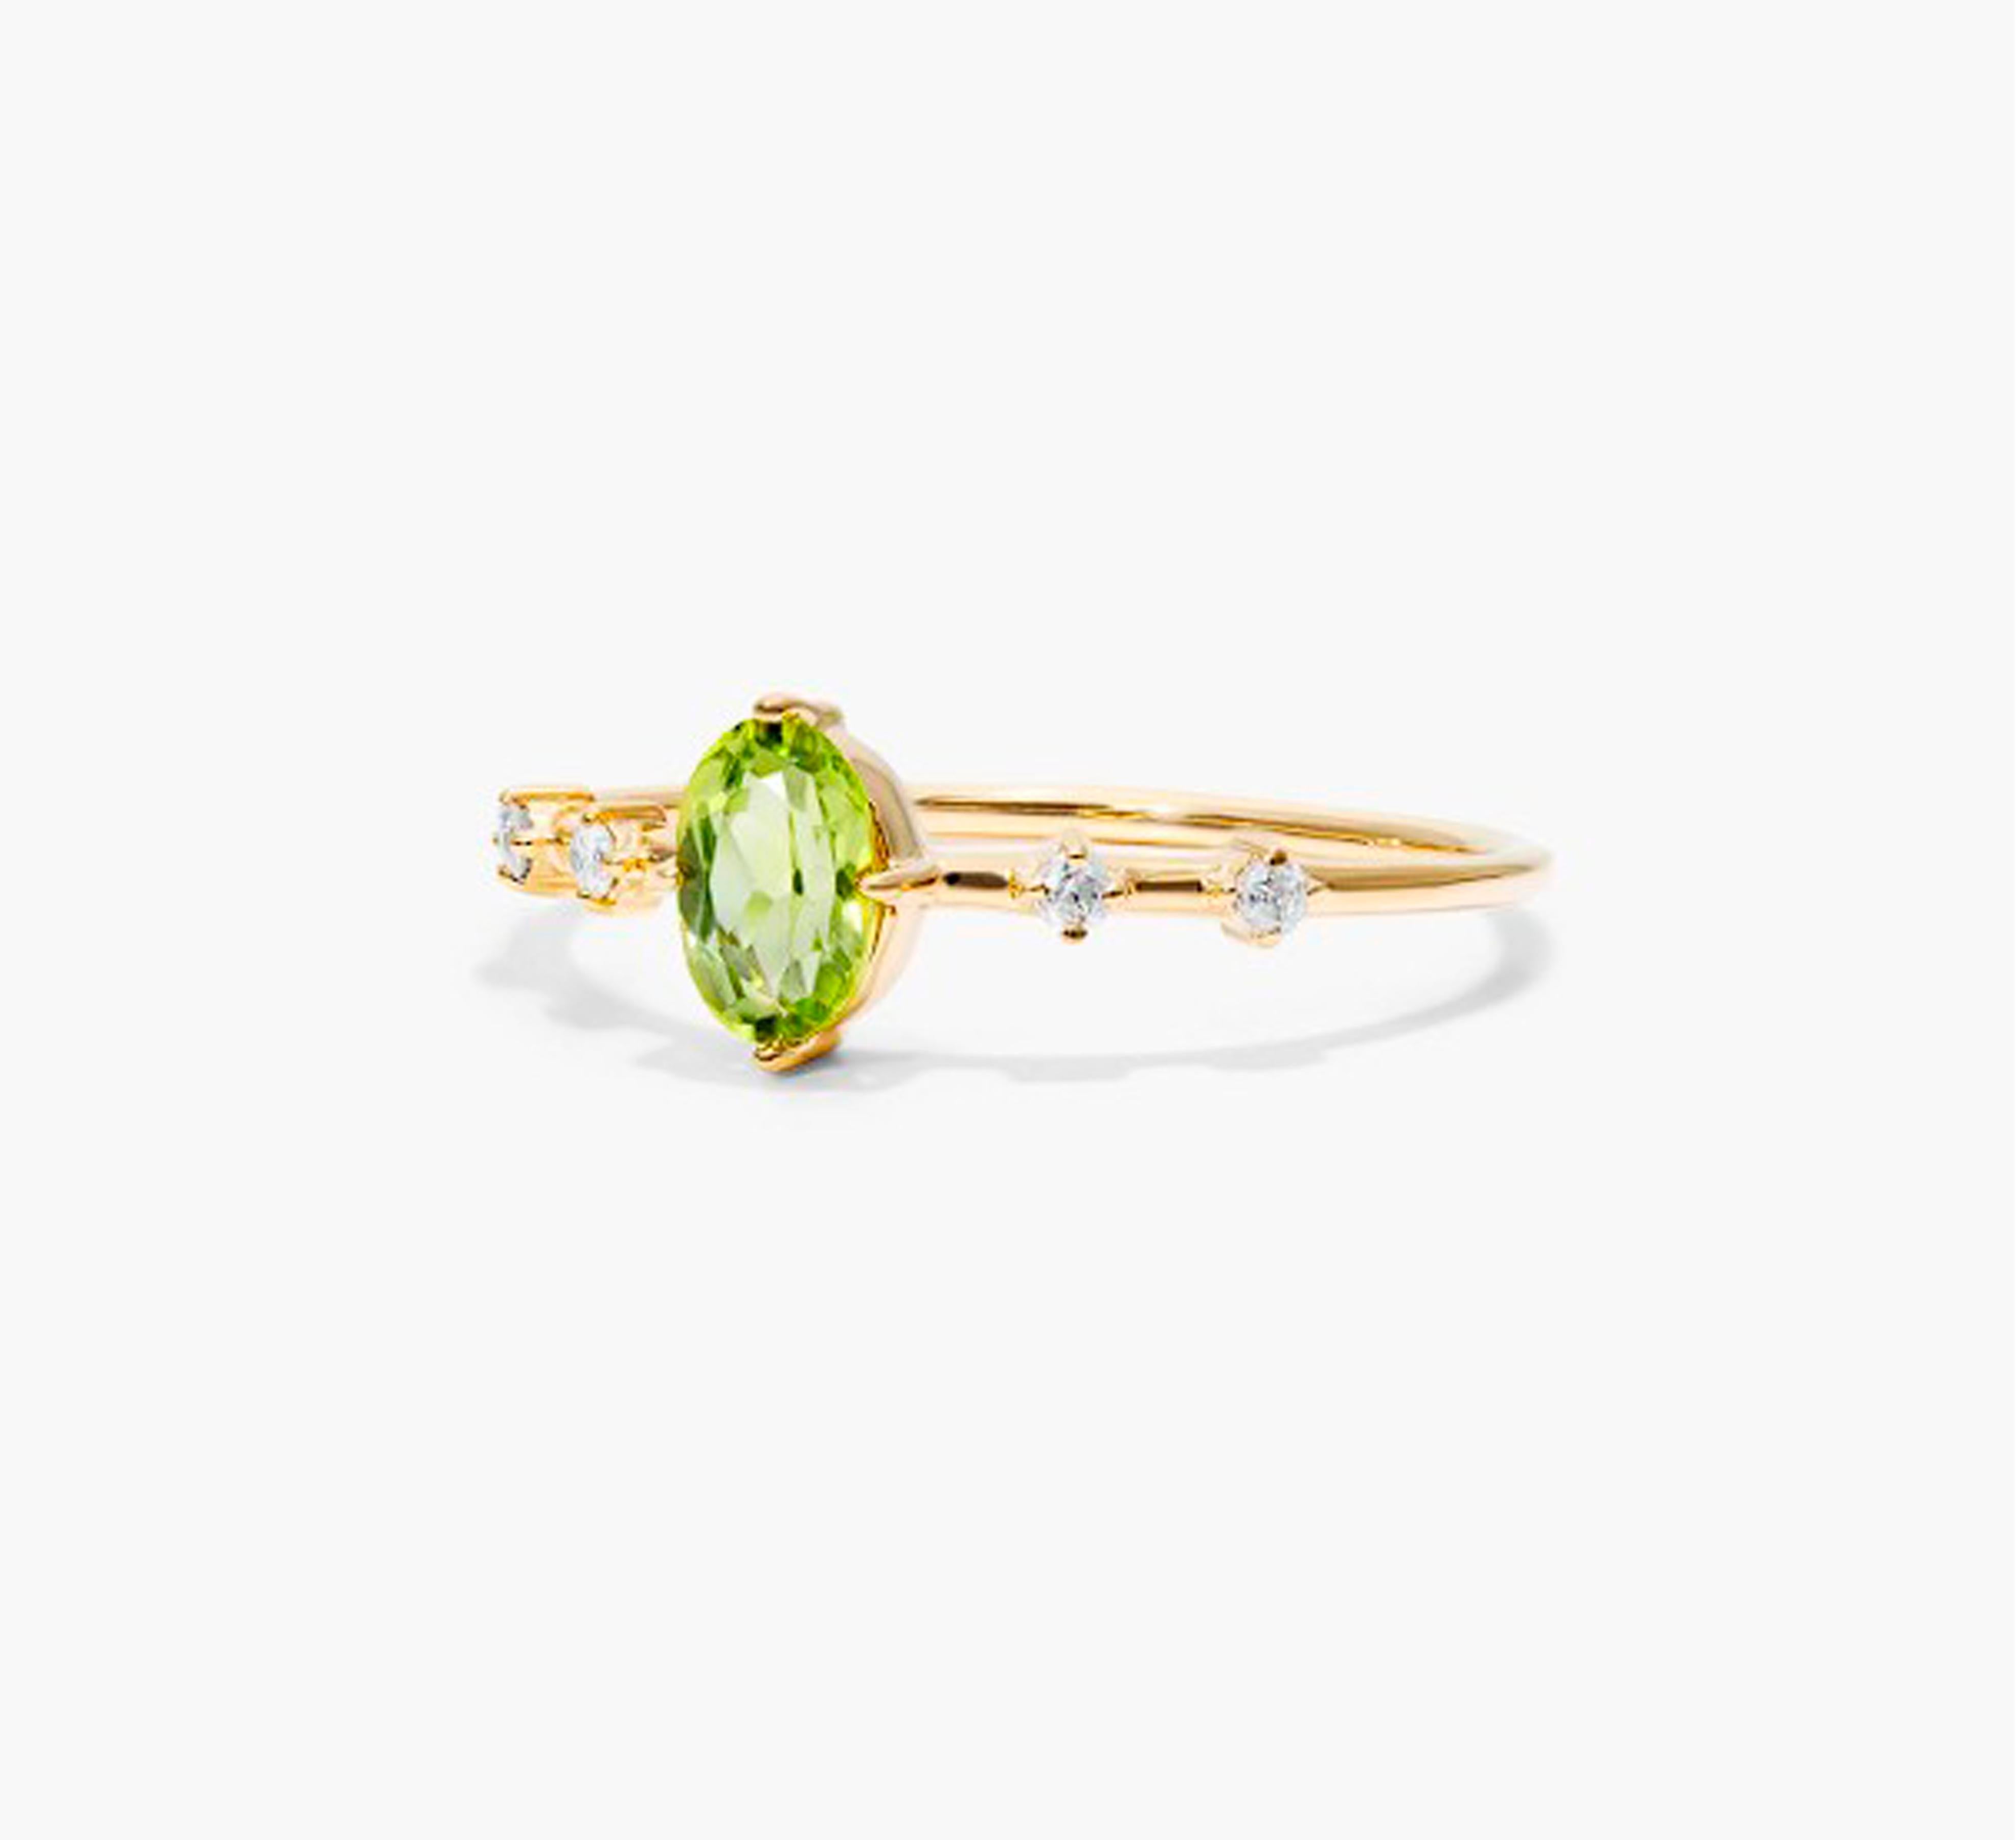 Oval Cut August birthstone peridot 14k gold ring. For Sale